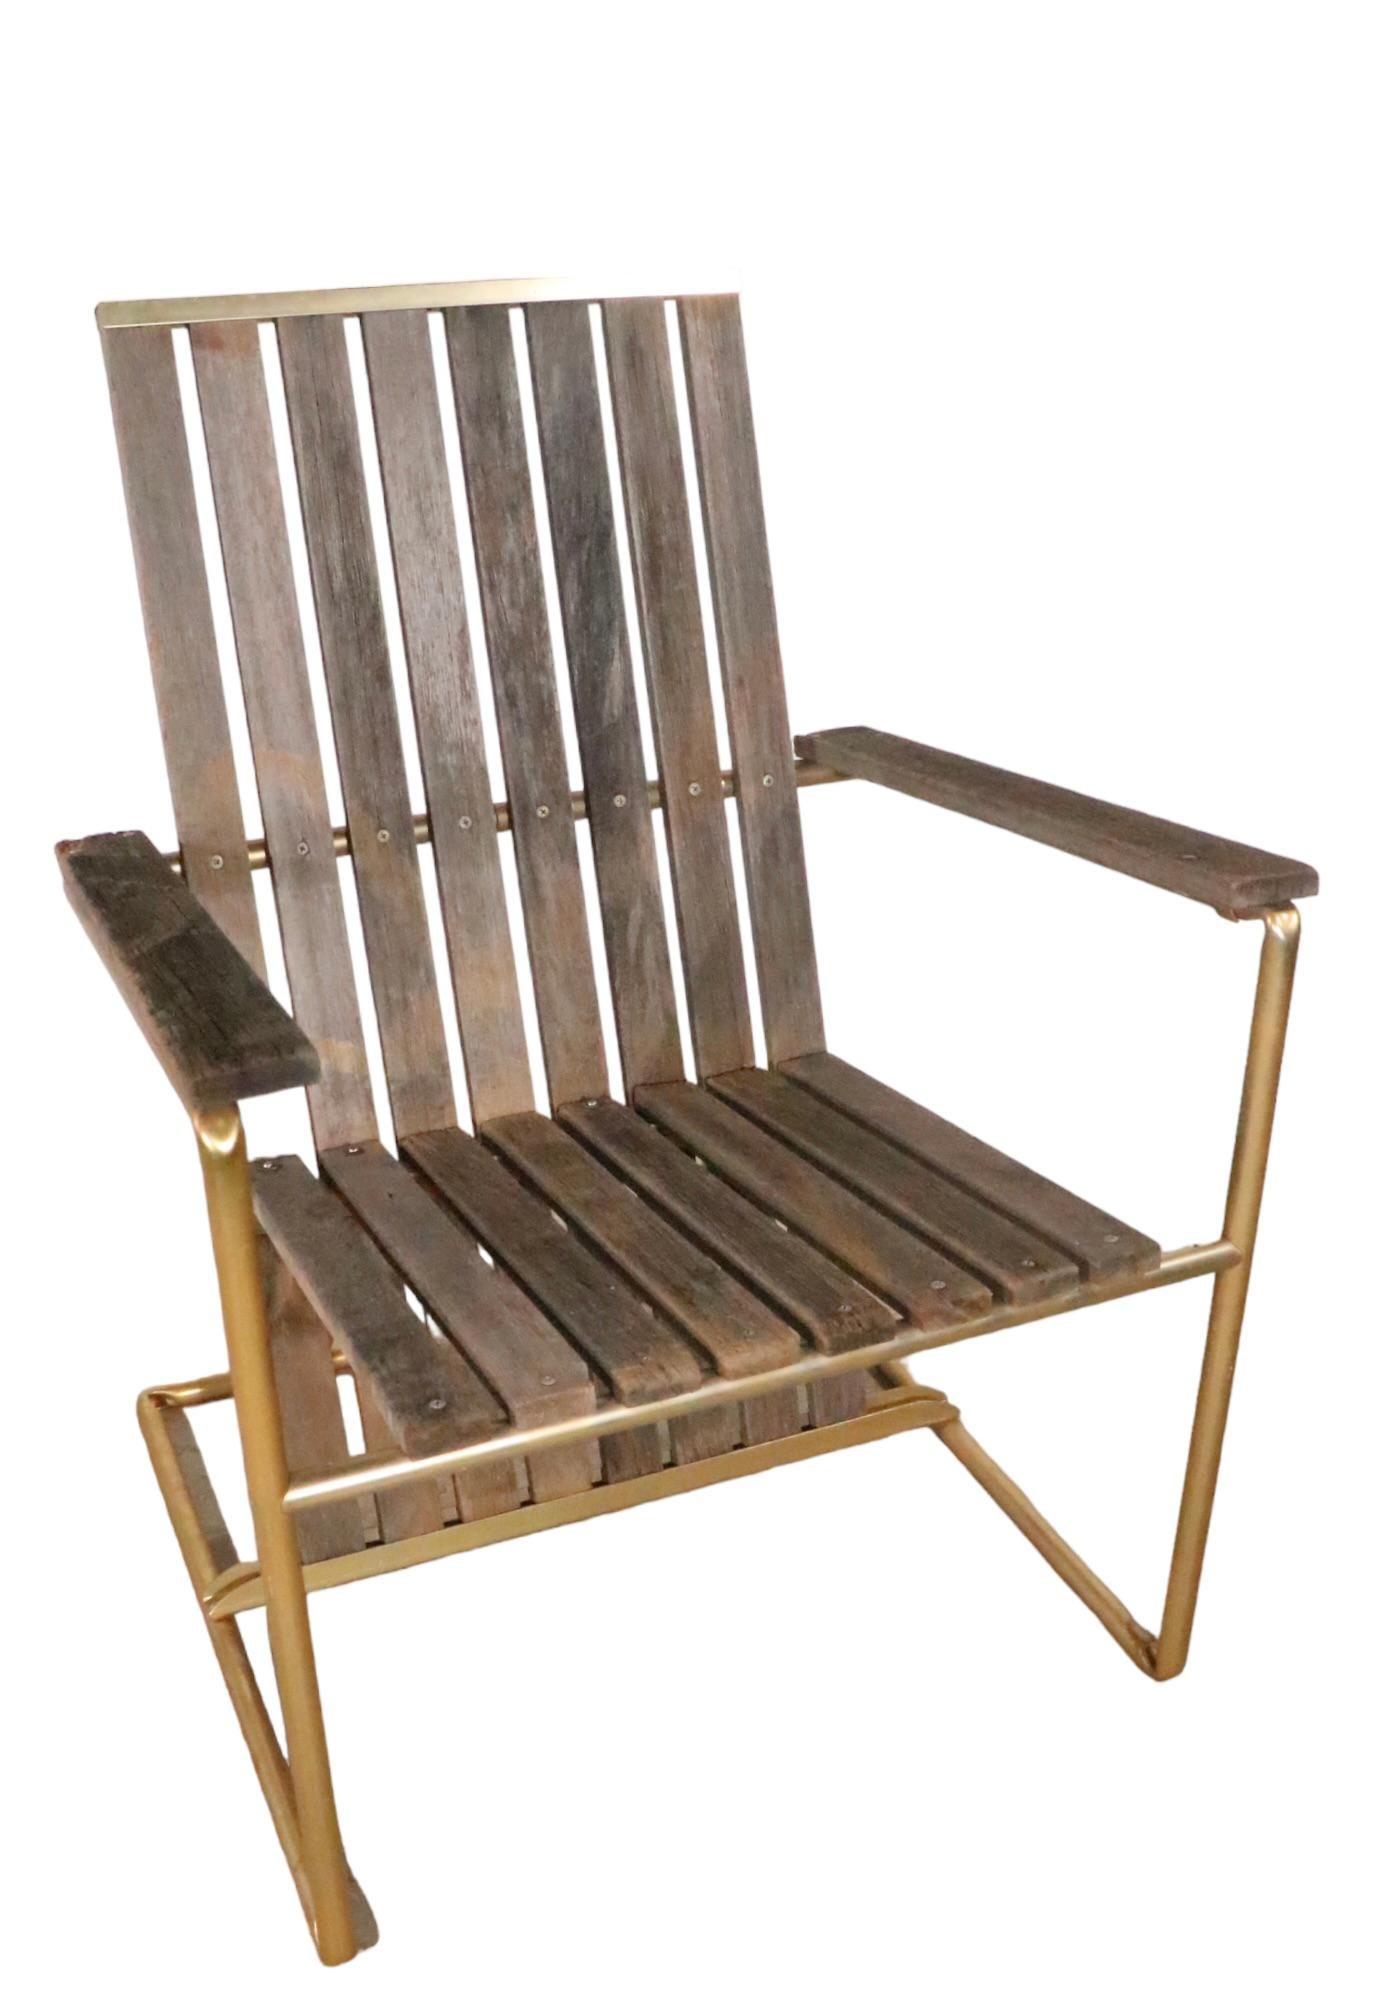 Vintage Garden Patio Poolside Lounge Chair circa 1970's For Sale 8